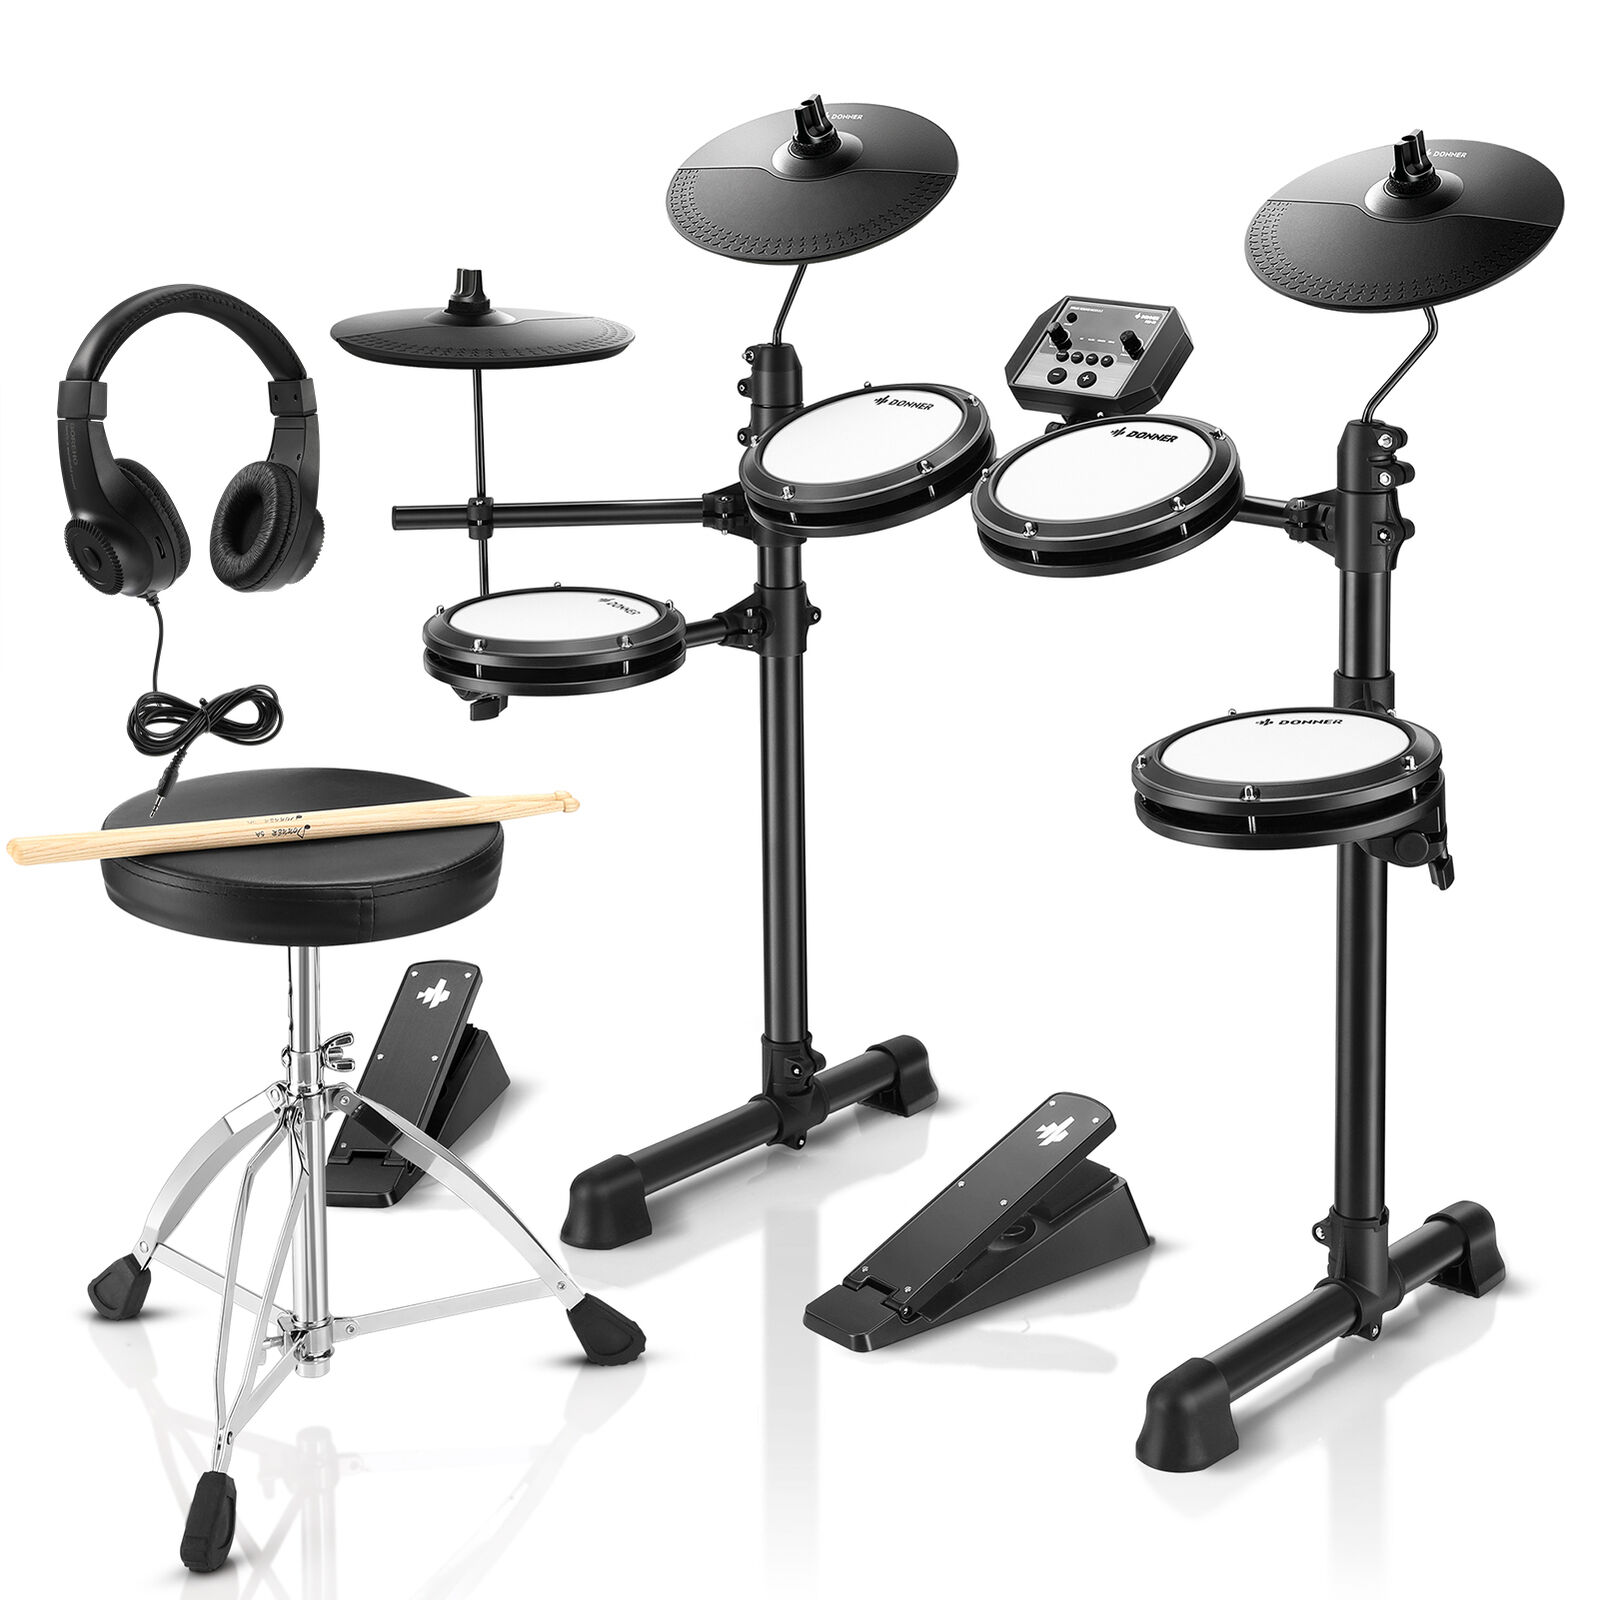 Donner DED-80 Electric Drum Set Quiet Mesh Pad Electronic Drum Kit With Throne